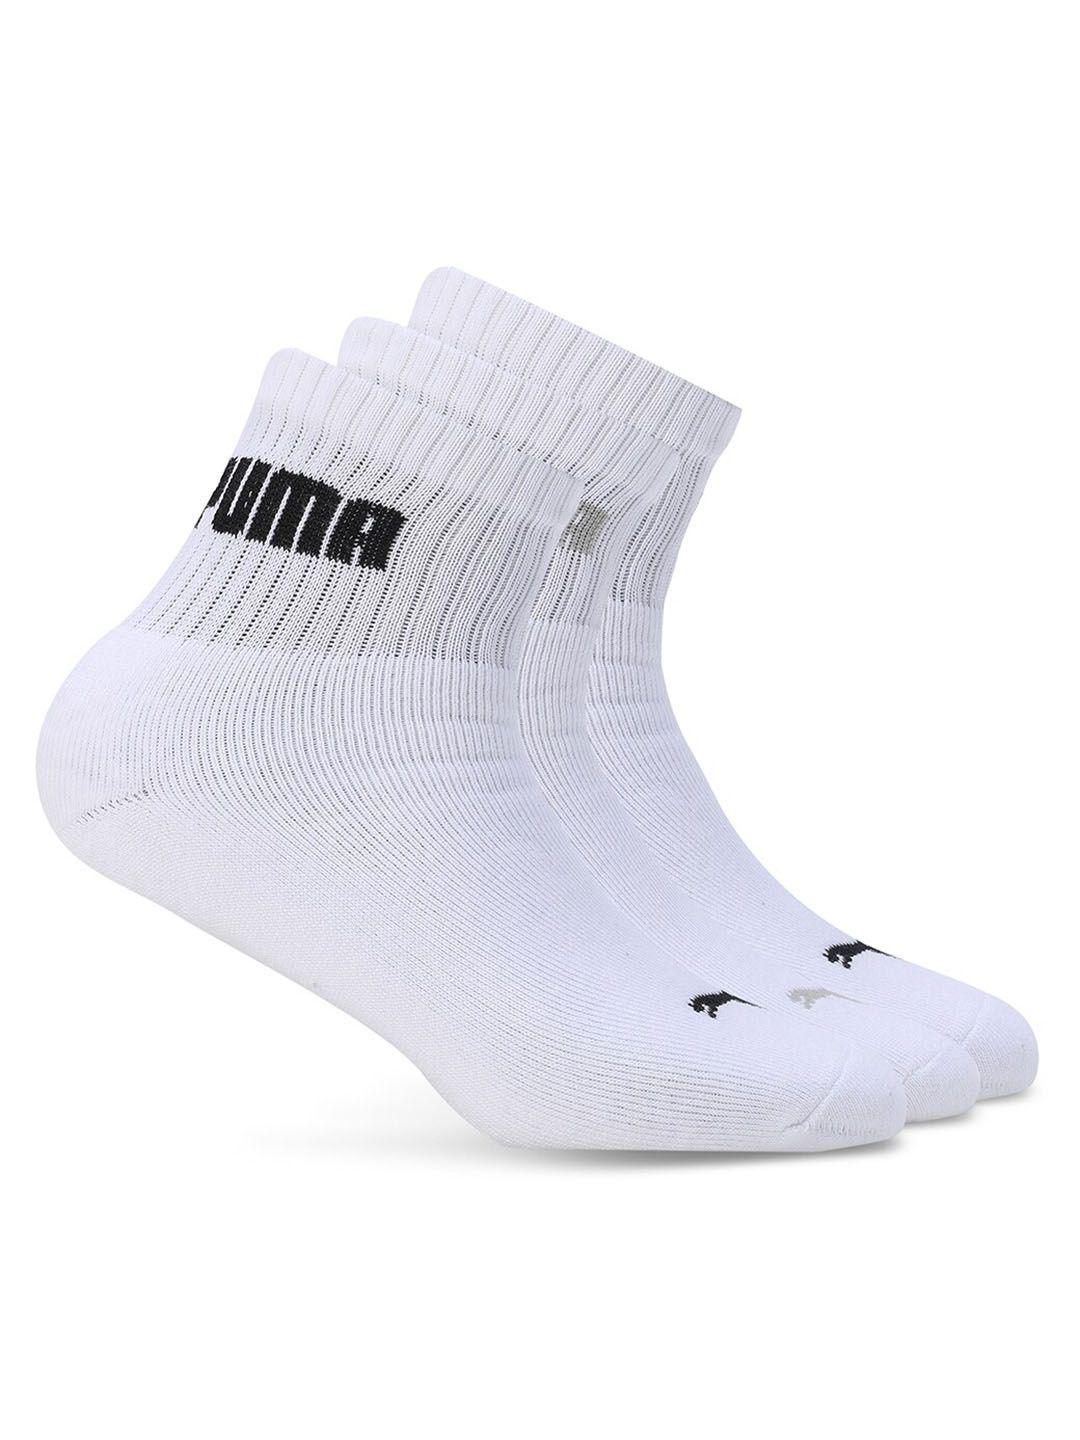 puma-unisex-pack-of-3-printed-cotton-above-ankle-length-socks